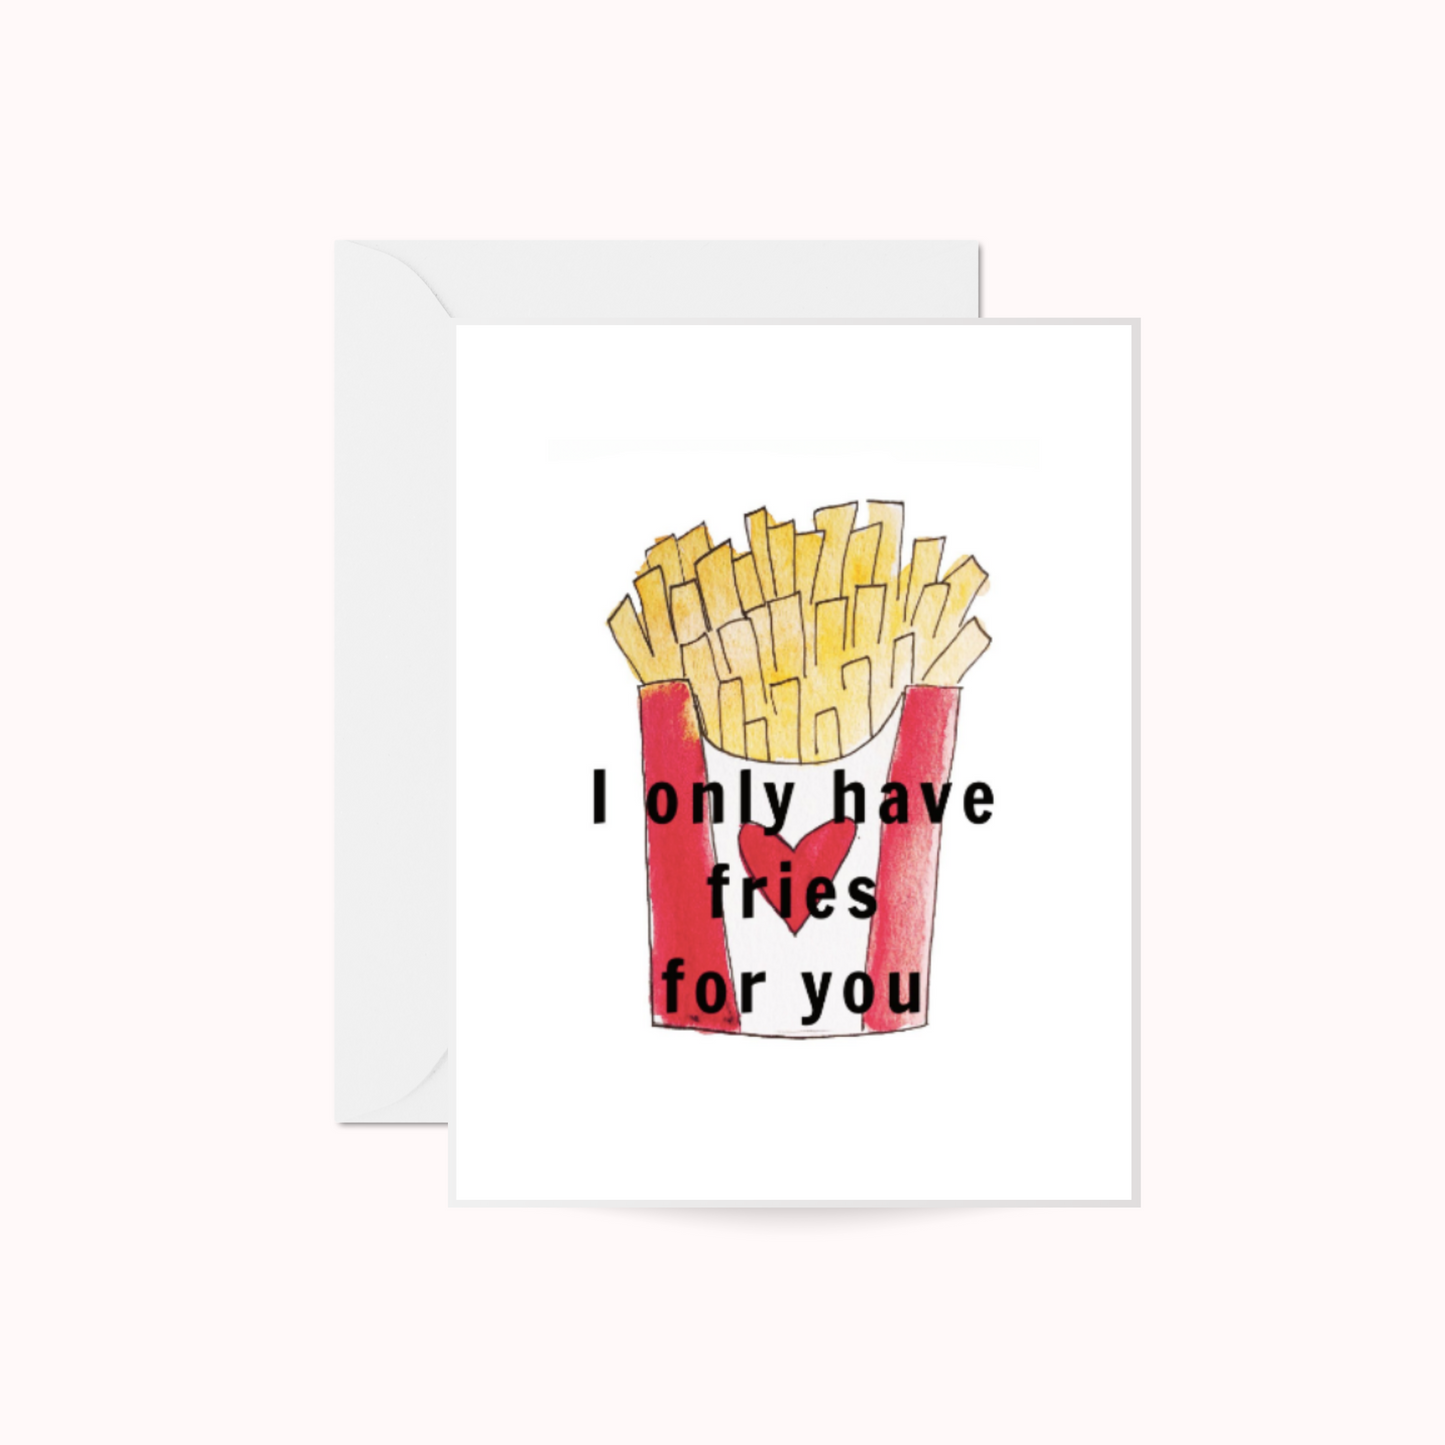 "I only have fries for you"